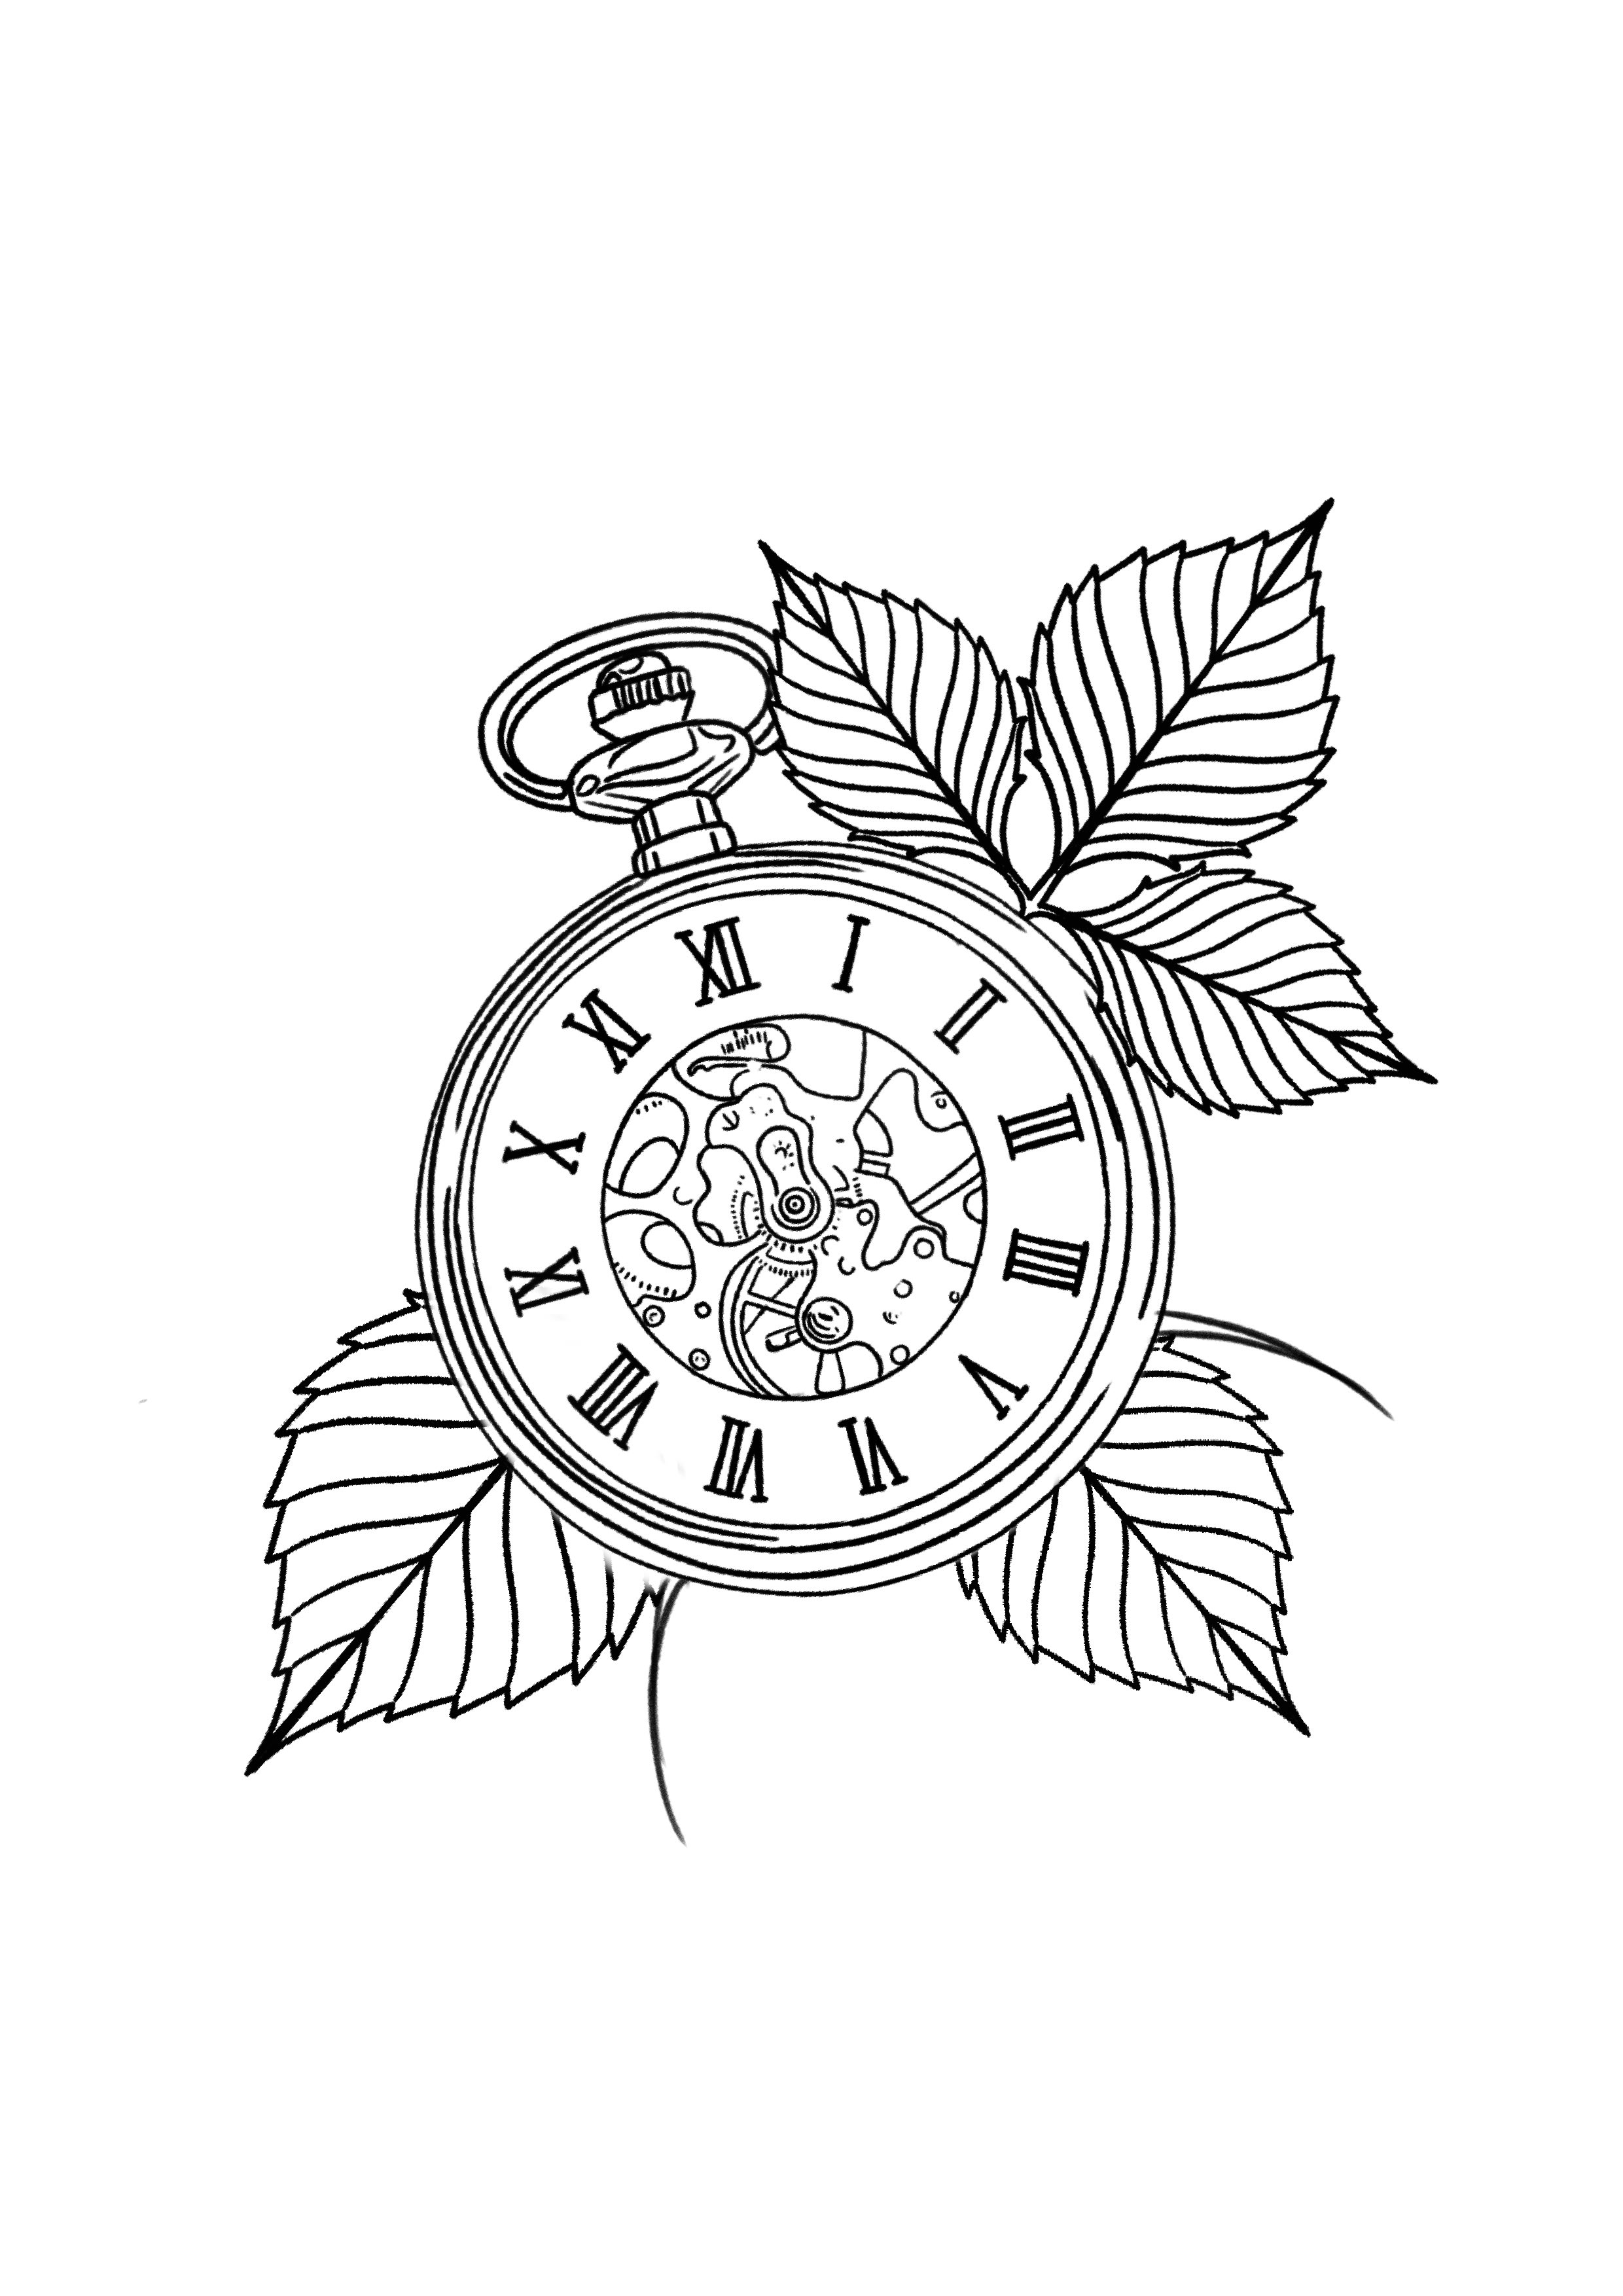 Simple Pocket Watch Line Drawing The resolution of image is 1722x2400